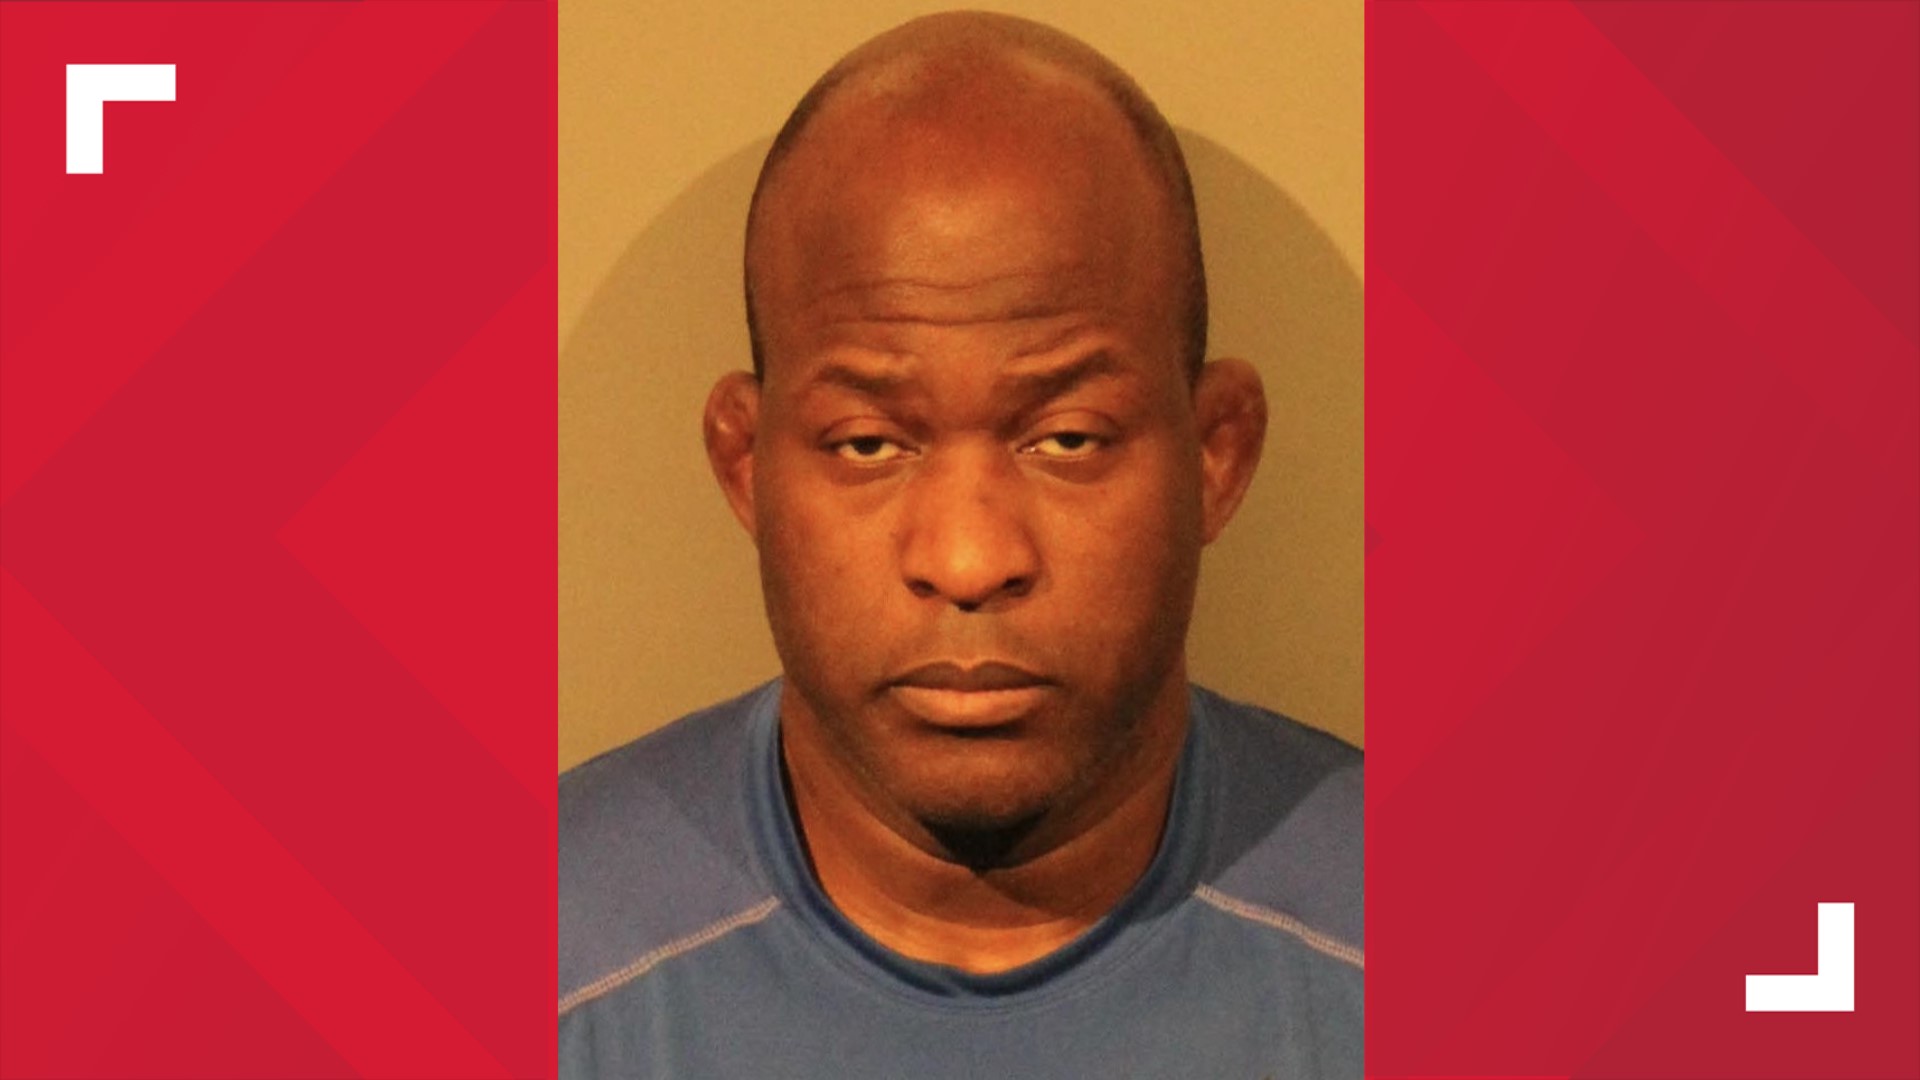 Police said Quincey Clark is facing several charges, including lewd and lascivious acts with a child under 18. He was also a 2000 U.S. Olympic wrestler.